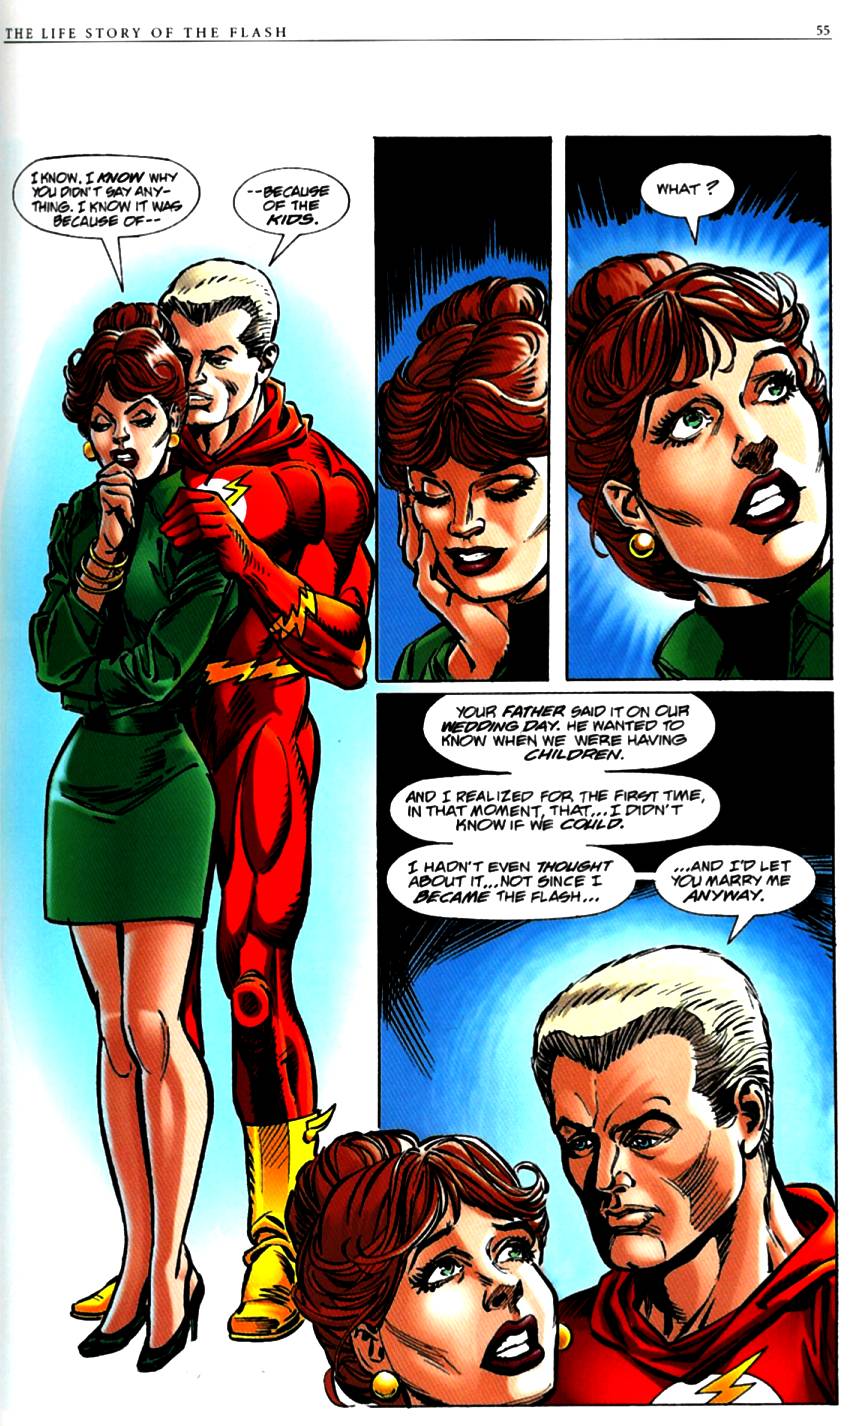 Read online The Life Story of the Flash comic -  Issue # Full - 57